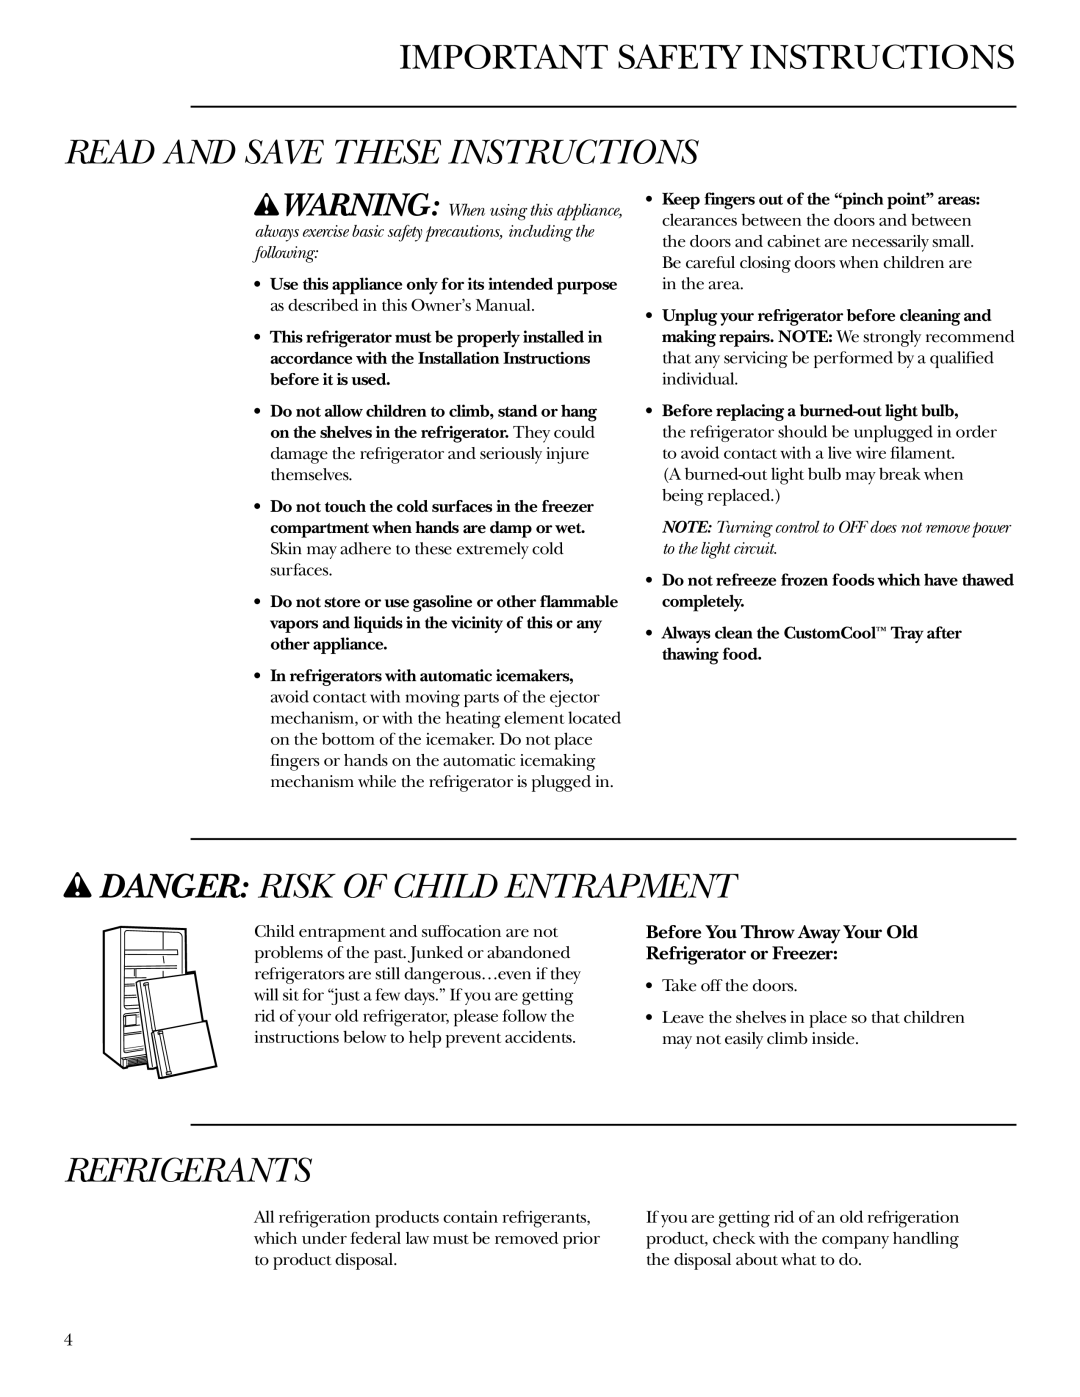 GE Monogram Refrigerator owner manual Important Safety Instructions, Read And Save These Instructions, Refrigerants 